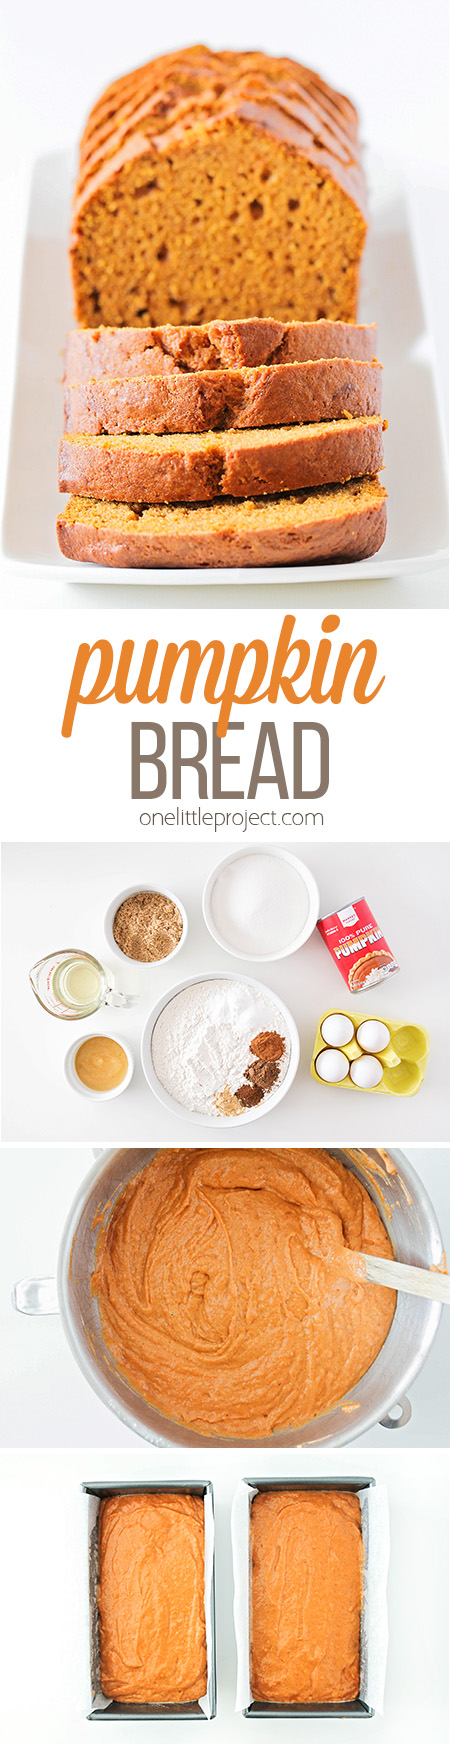 This soft and tender pumpkin bread has the most delicious pumpkin spice flavor, and is the perfect treat for a crisp fall day!